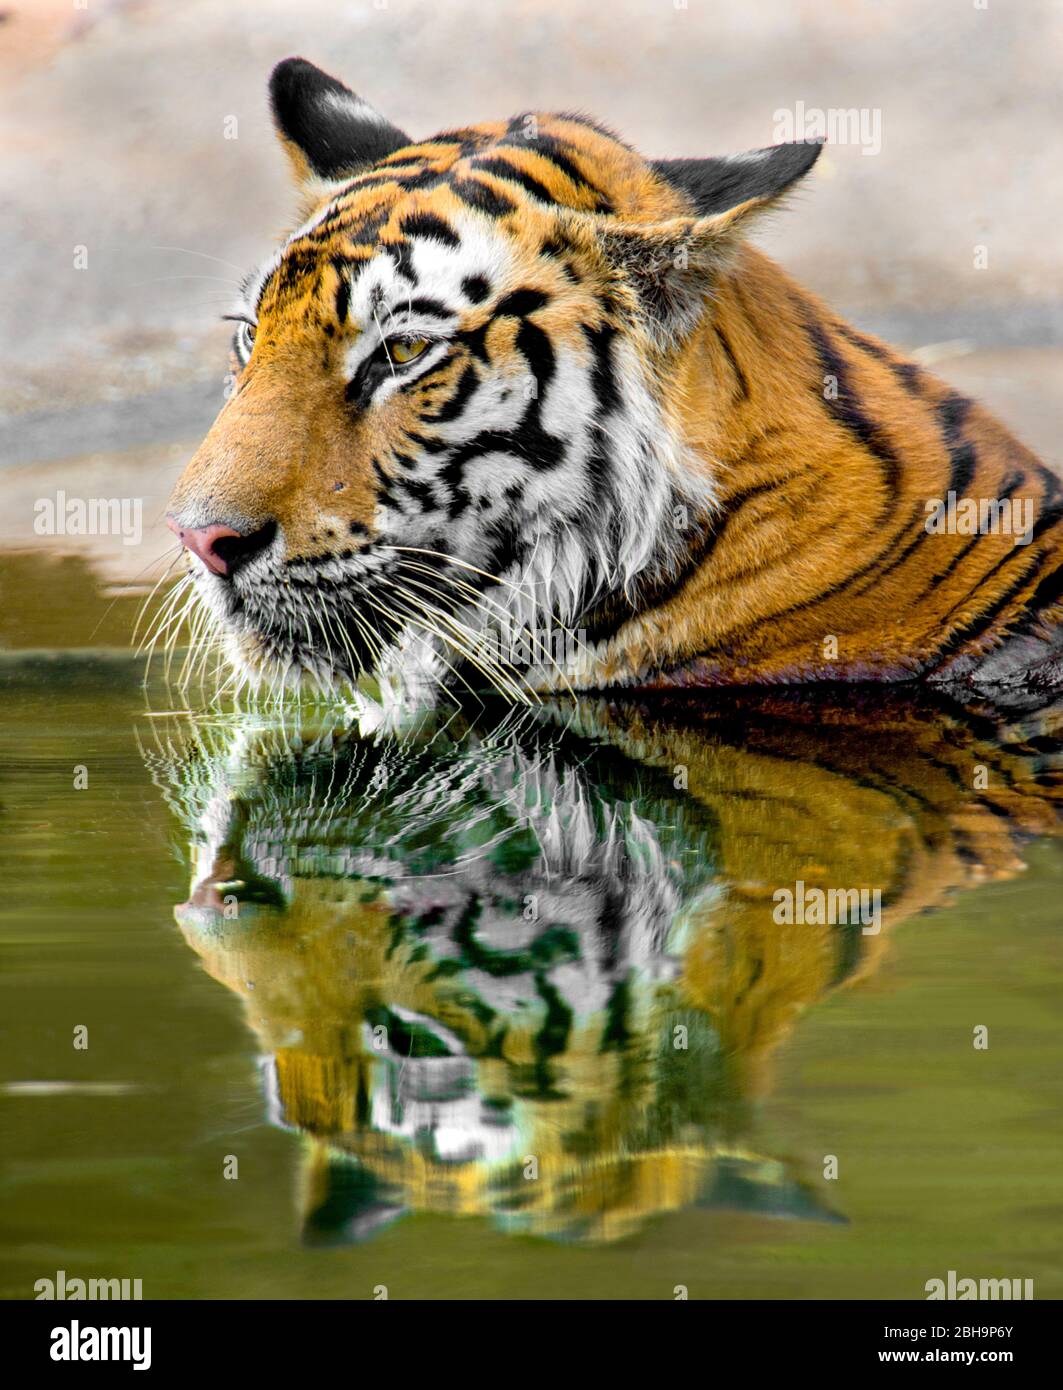 Bengal tiger reflecting in water, India Stock Photo